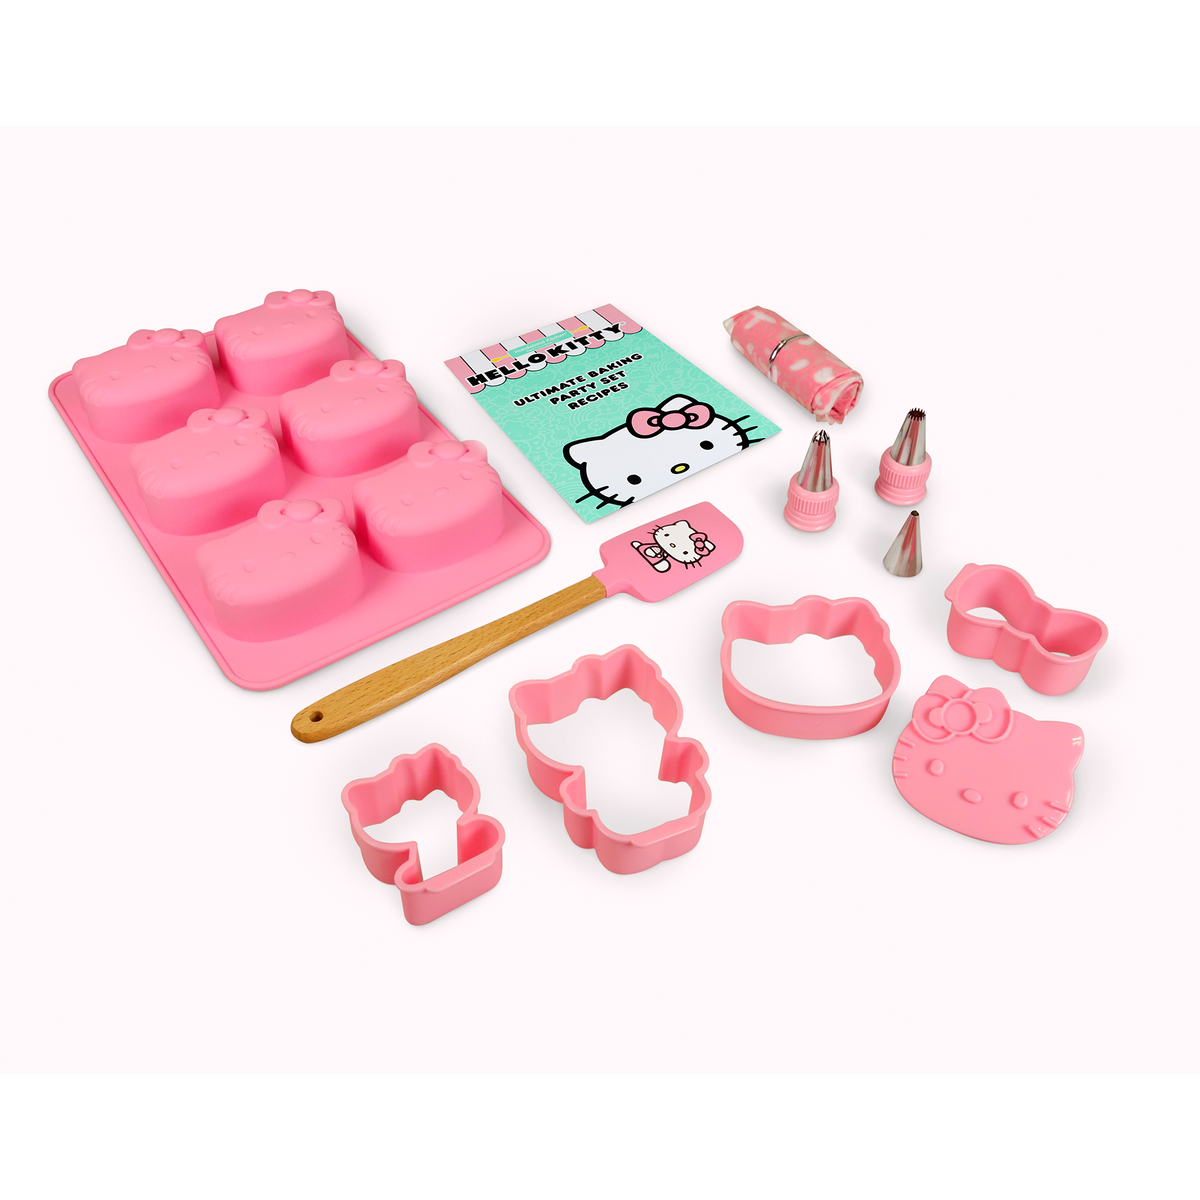 Hello Kitty Ultimate Baking Party Set Home Goods Handstand Kitchen   